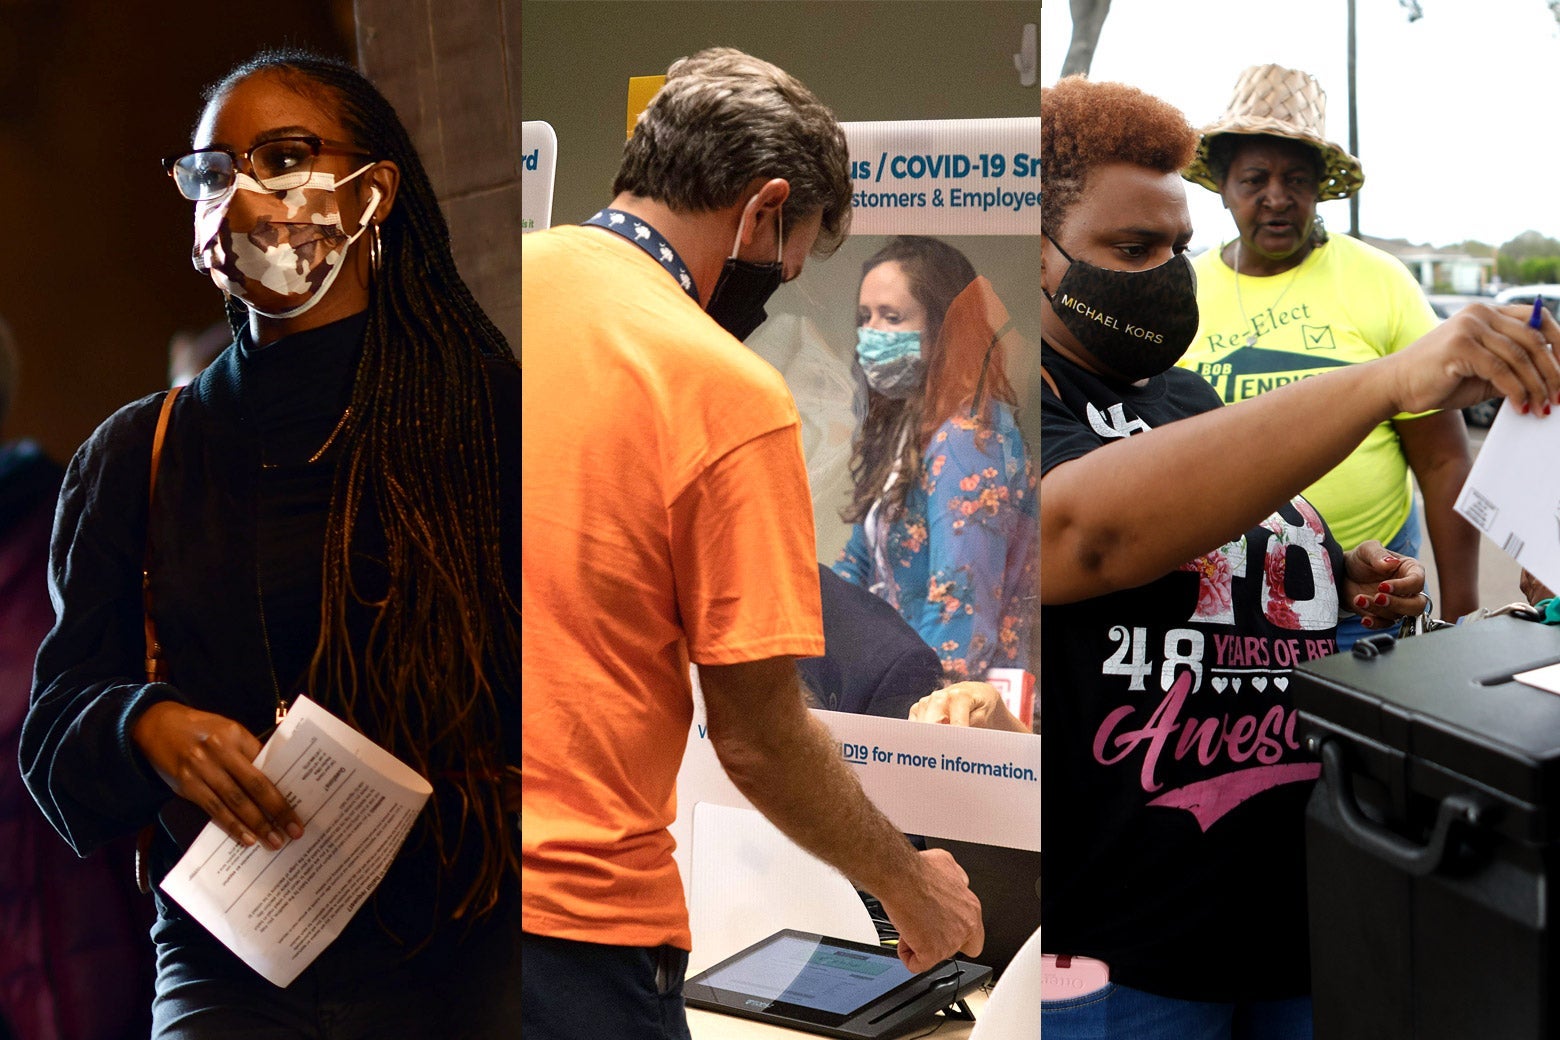 Side-by-side photos show different masked voters submitting their ballots.